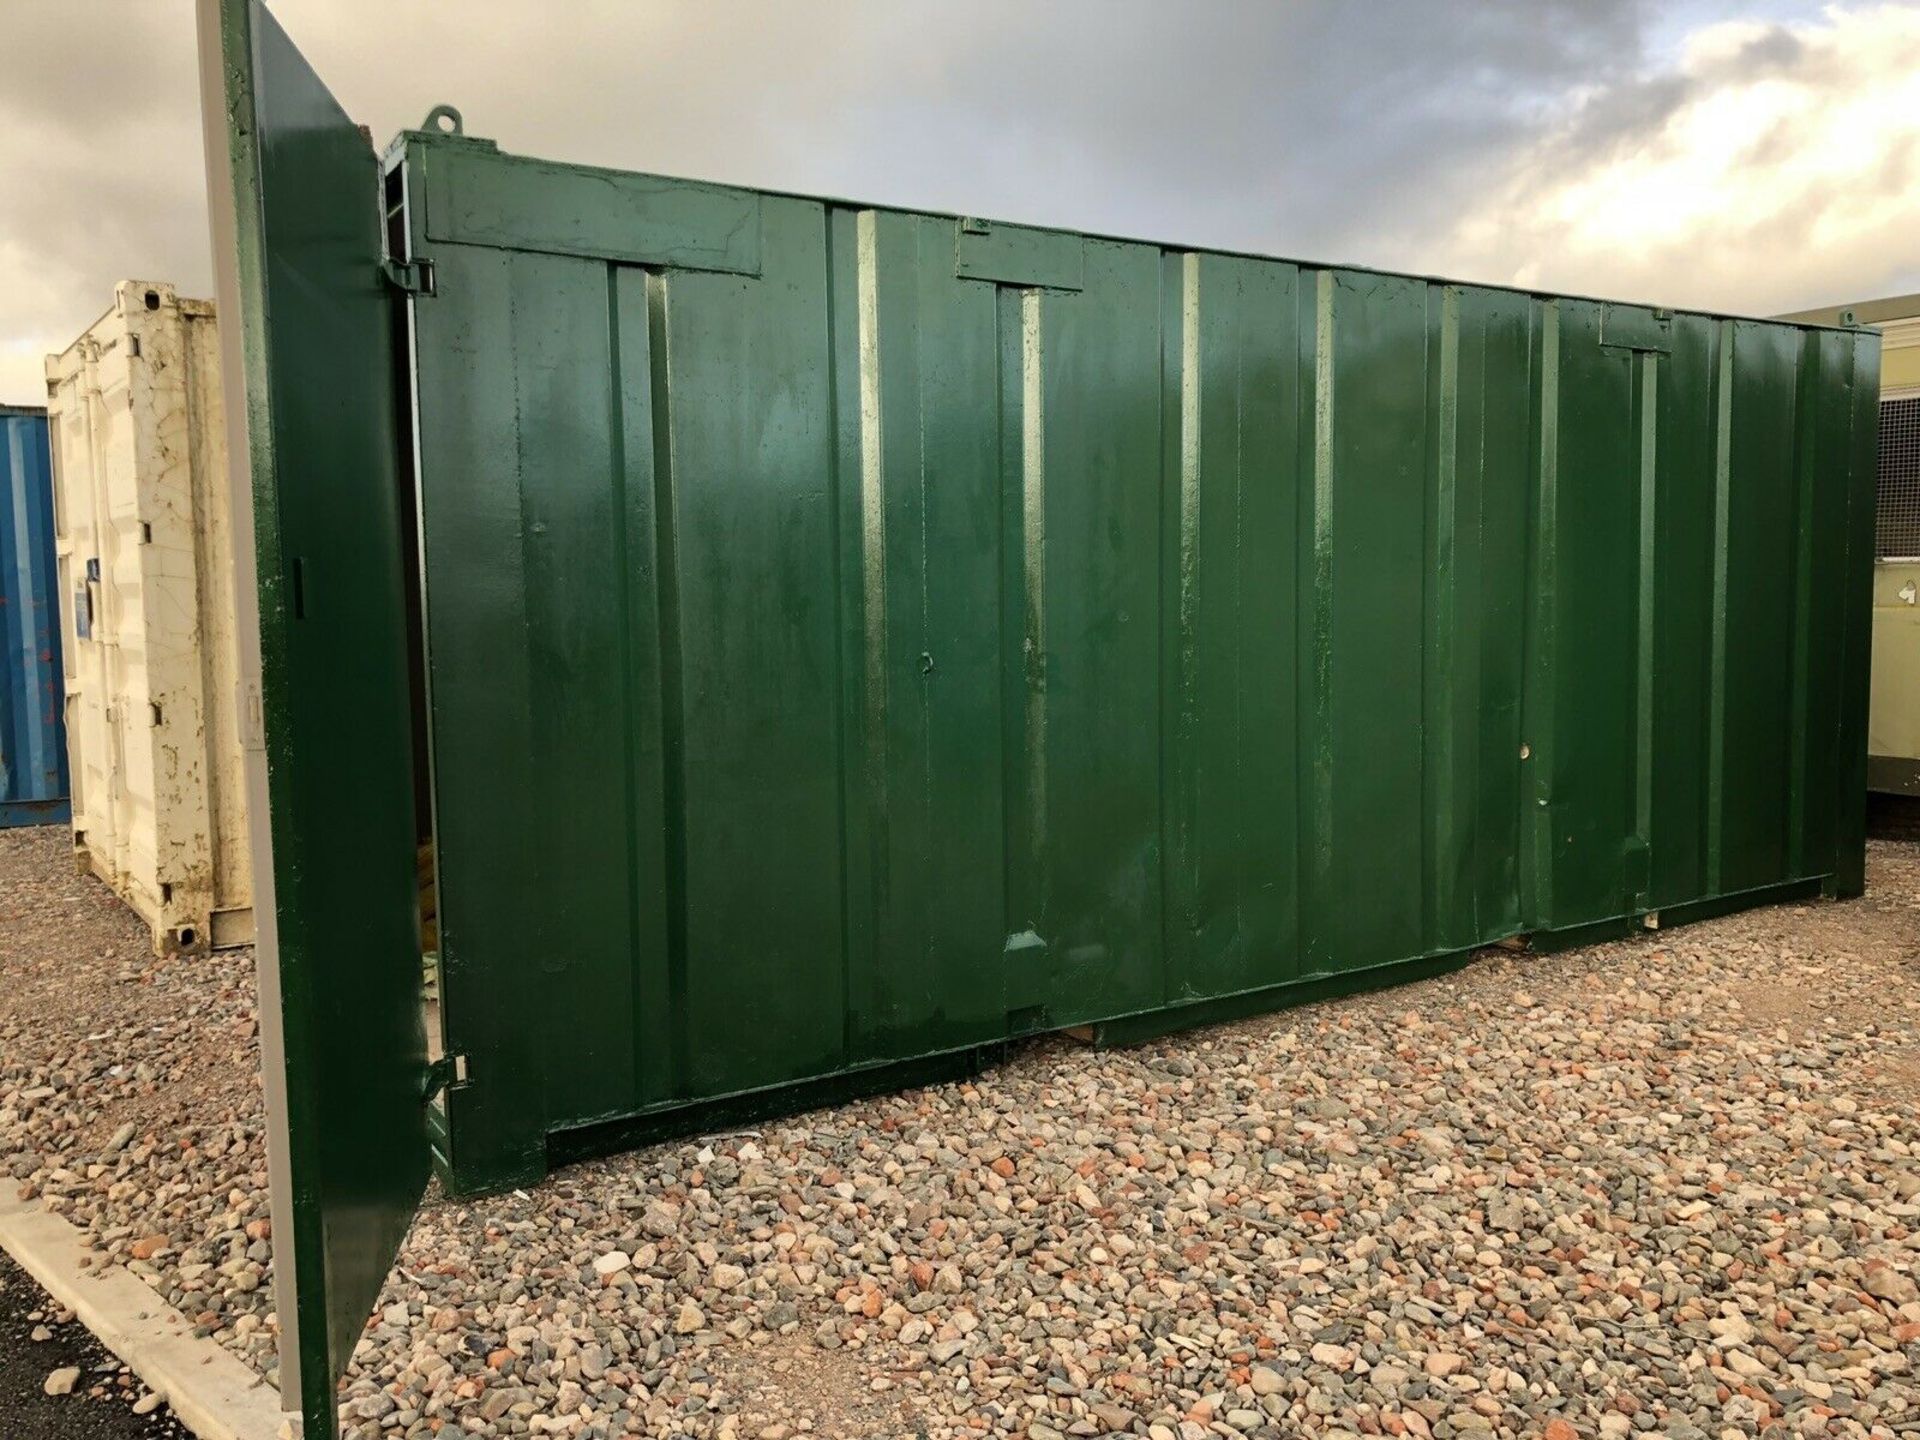 Refurbished 10 Foot X 8 Foot Steel Storage Shipping Container - Image 2 of 2